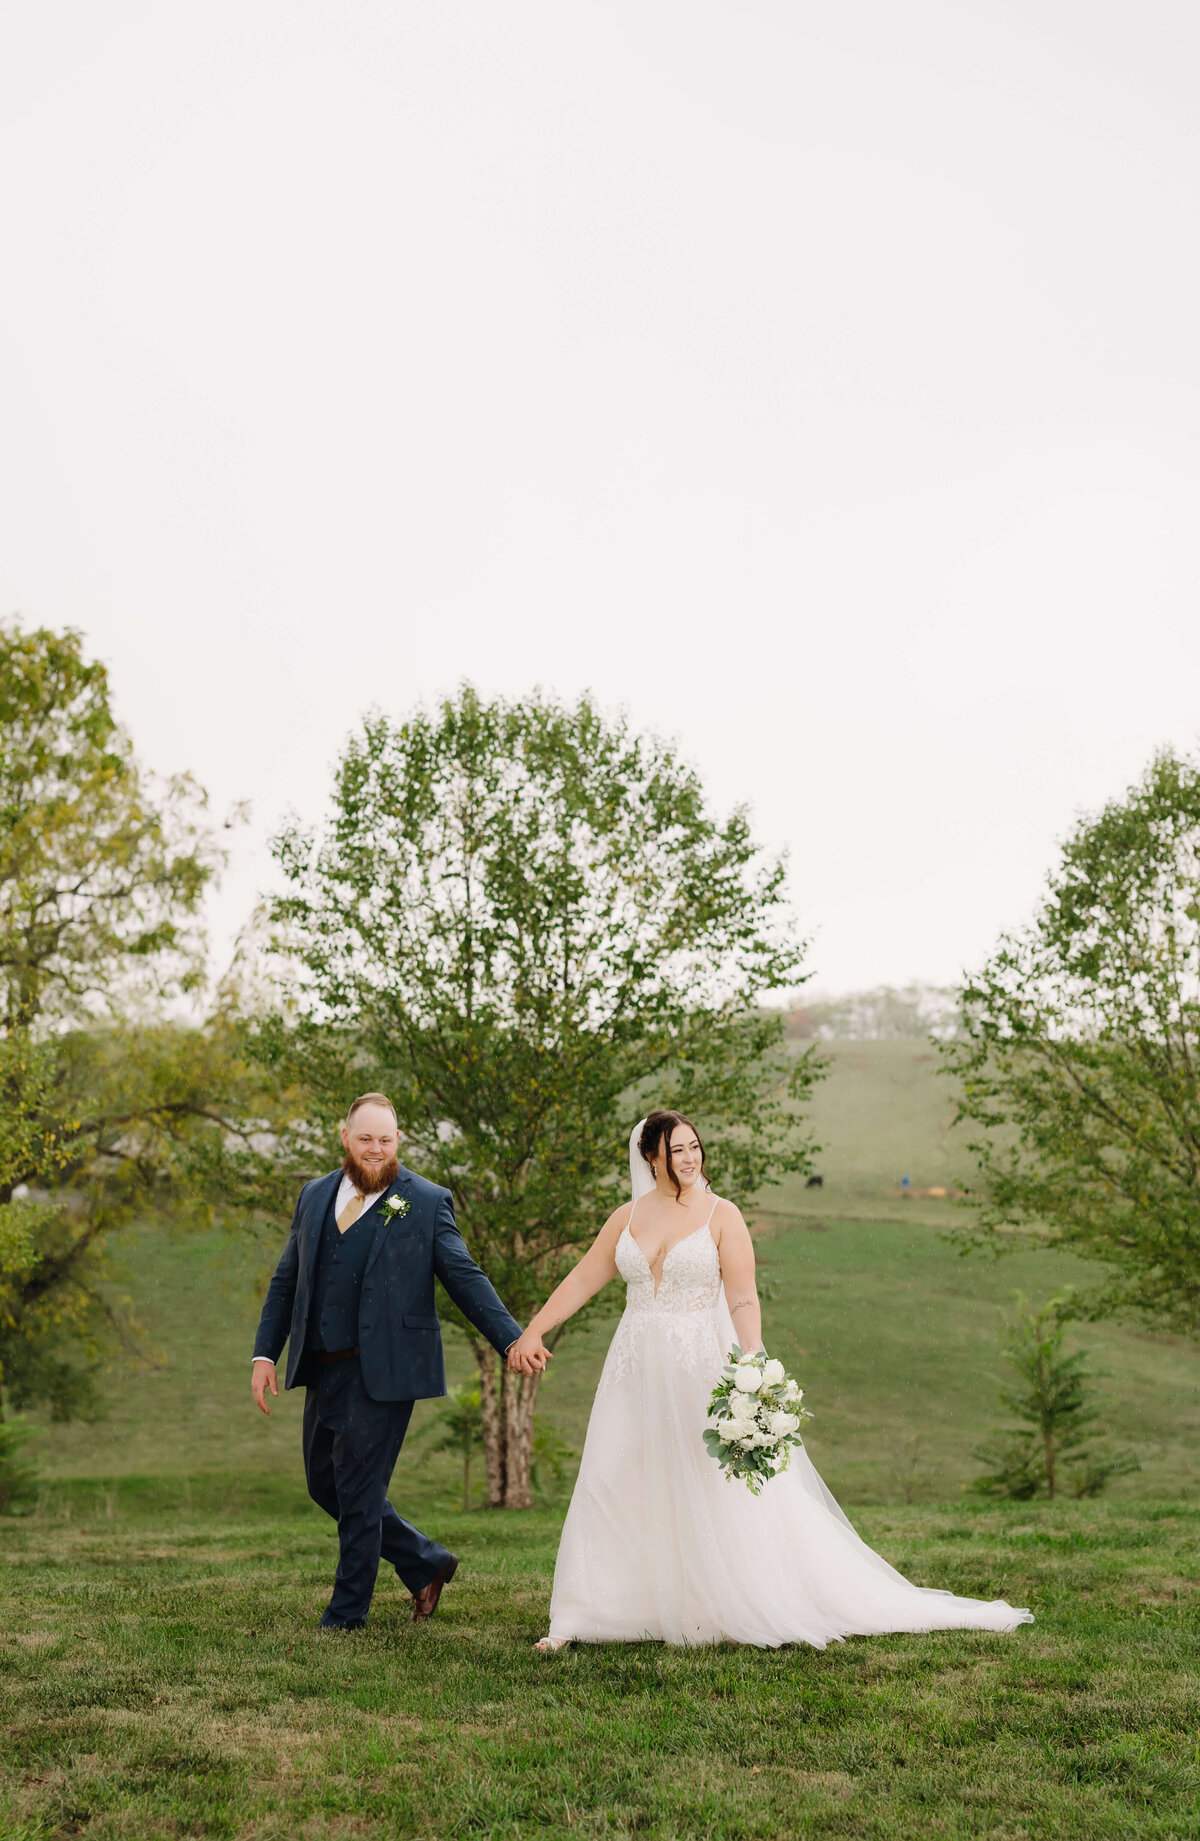 groom holding his brides hand and leading her through a field at Sunny Slope Farm as they weave through trees together on the farm for a spring wedding photographed by Charlottesville wedding photographer